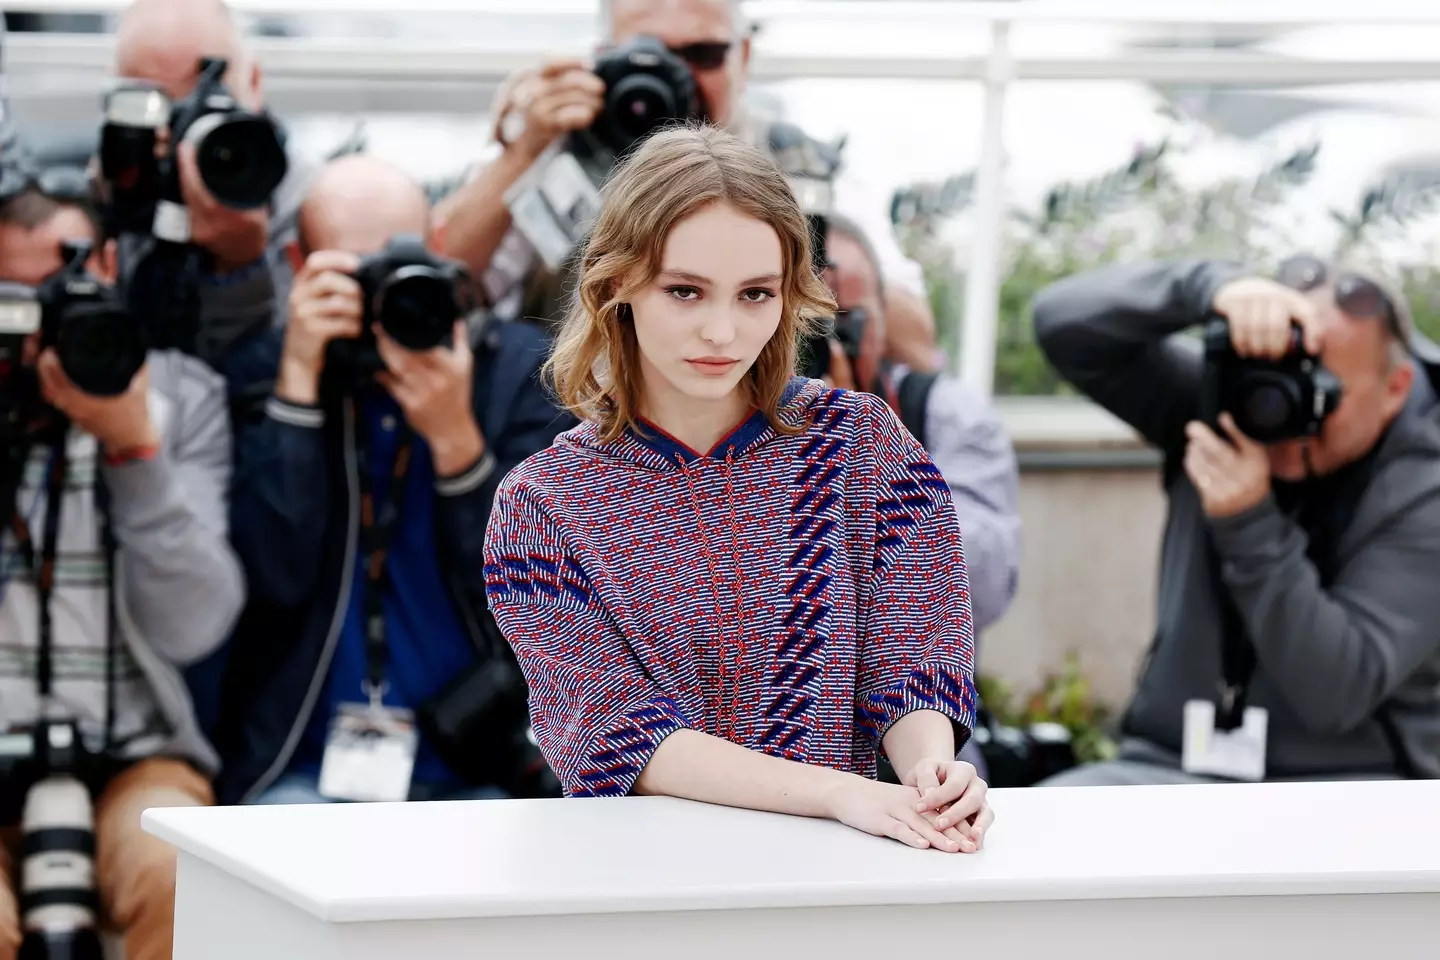 Lily Rose during a Cannes photo call that she totally earned all by herself.